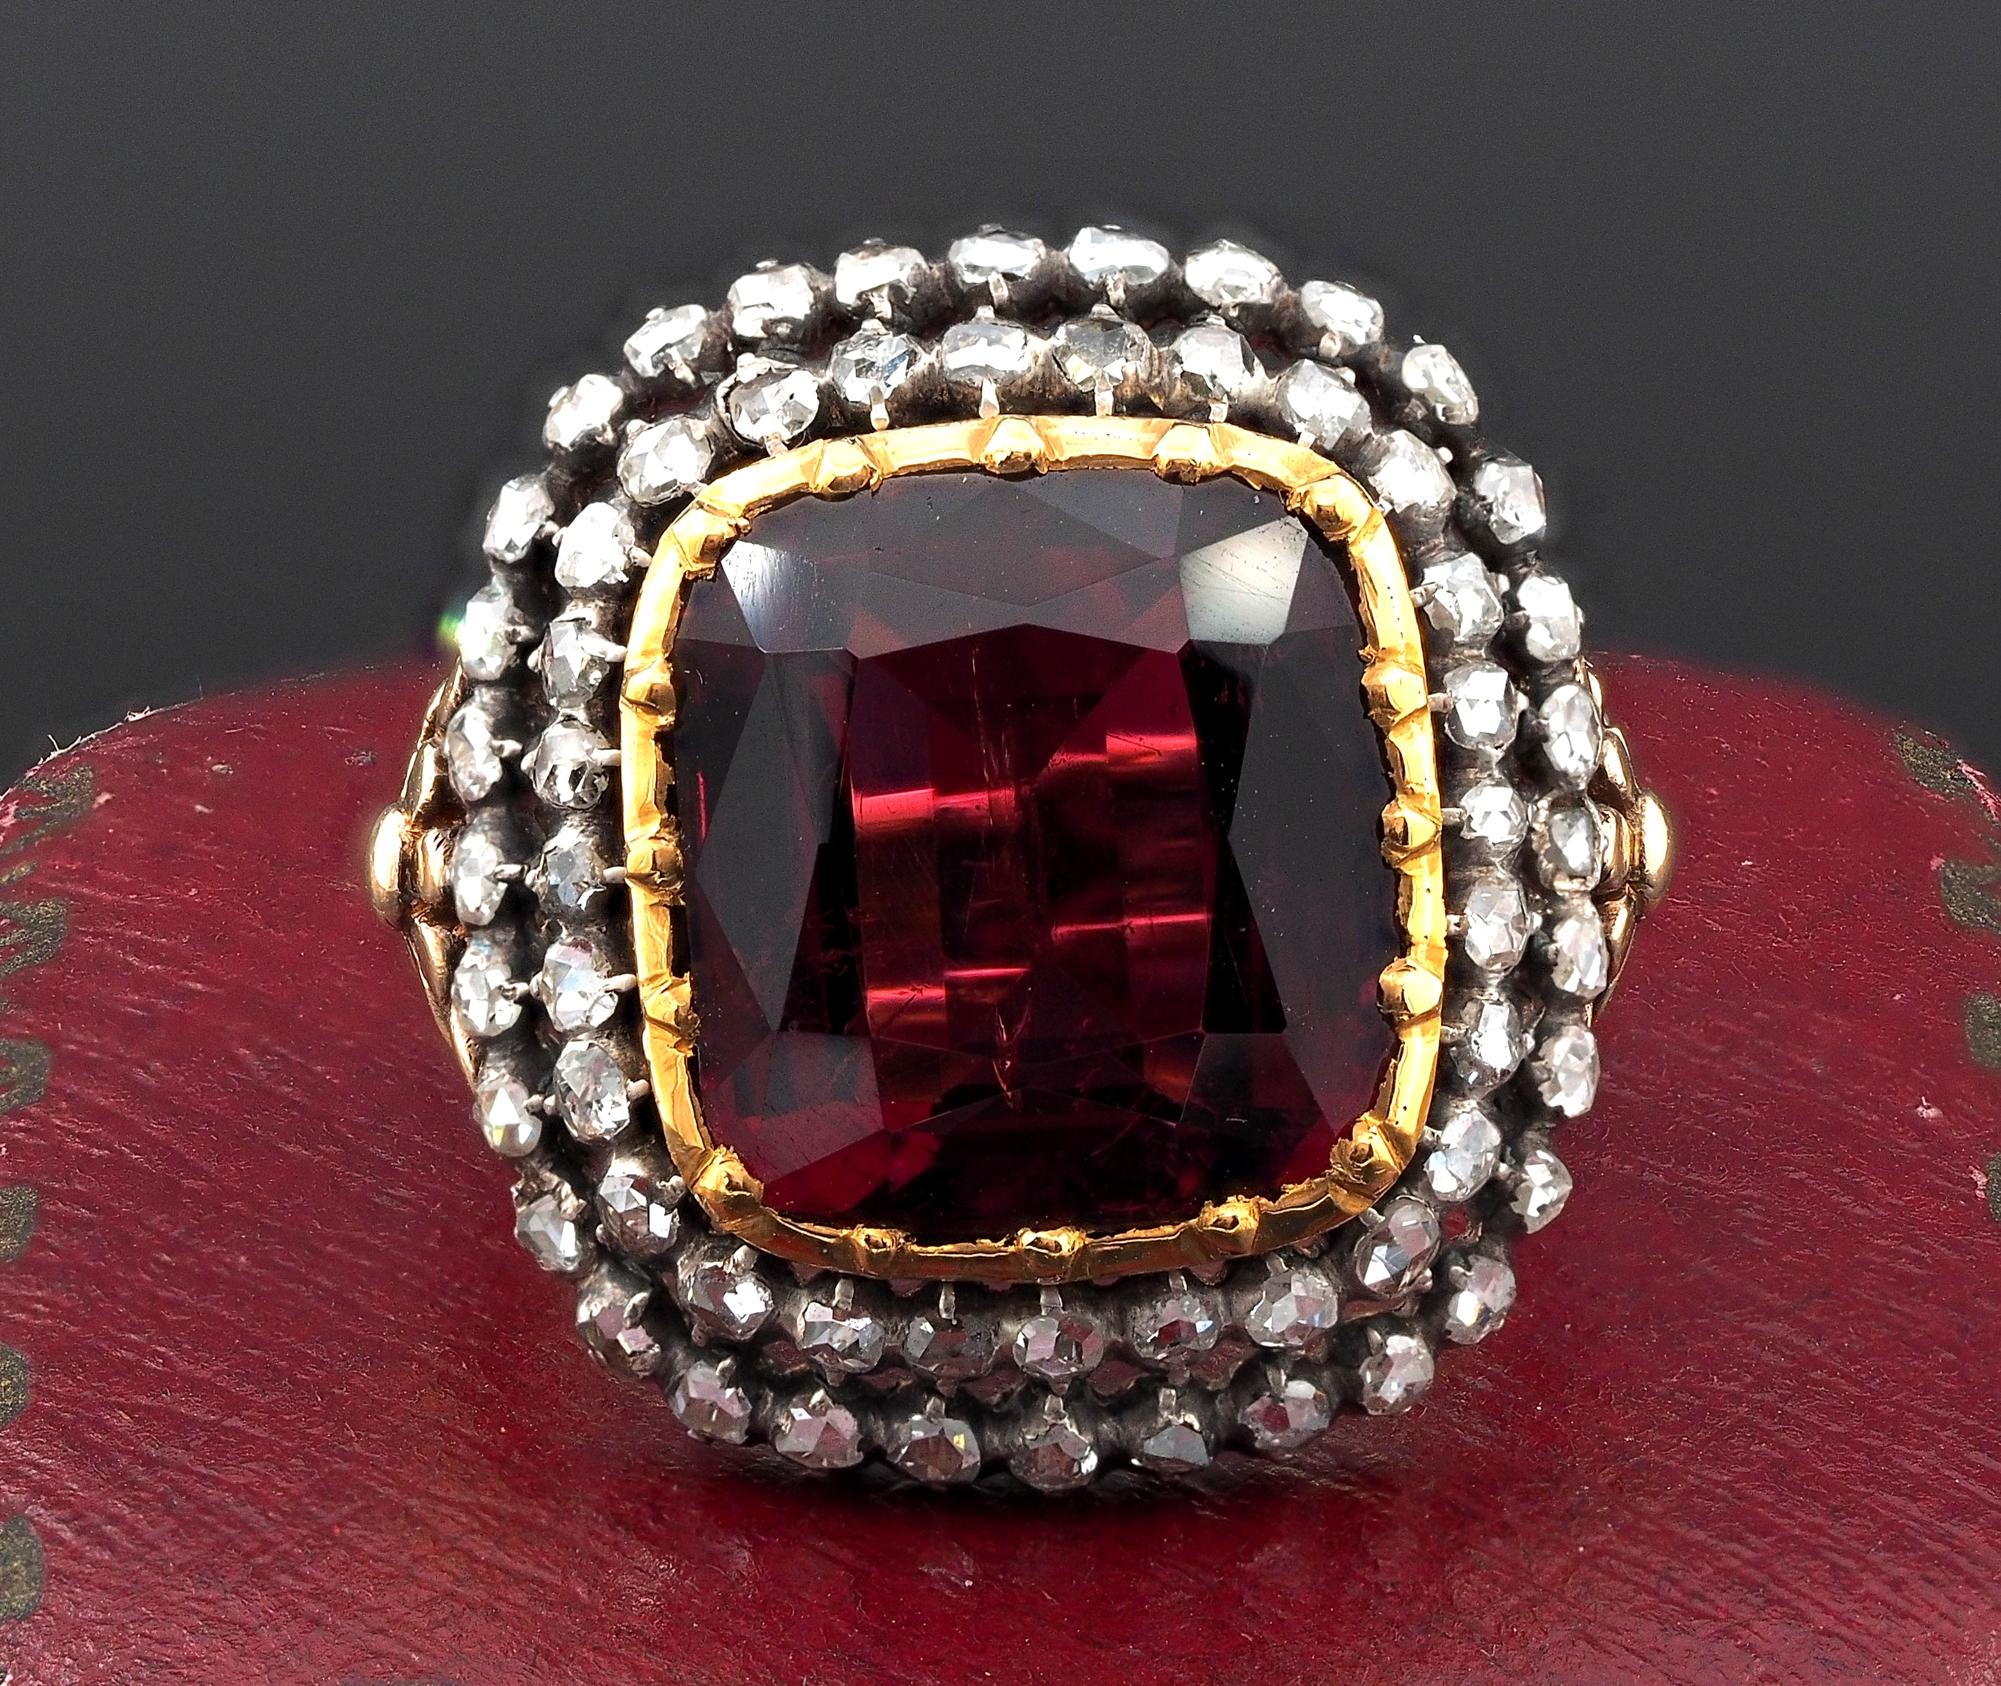 Victorian Rarity

This out of this world, spectacular, Victorian period ring is a proud prize of any collector of exceptional things of beauty
Rare example to please ahead with its unicity and dramatic visual impact
1890 ca, hand crafted of solid 18